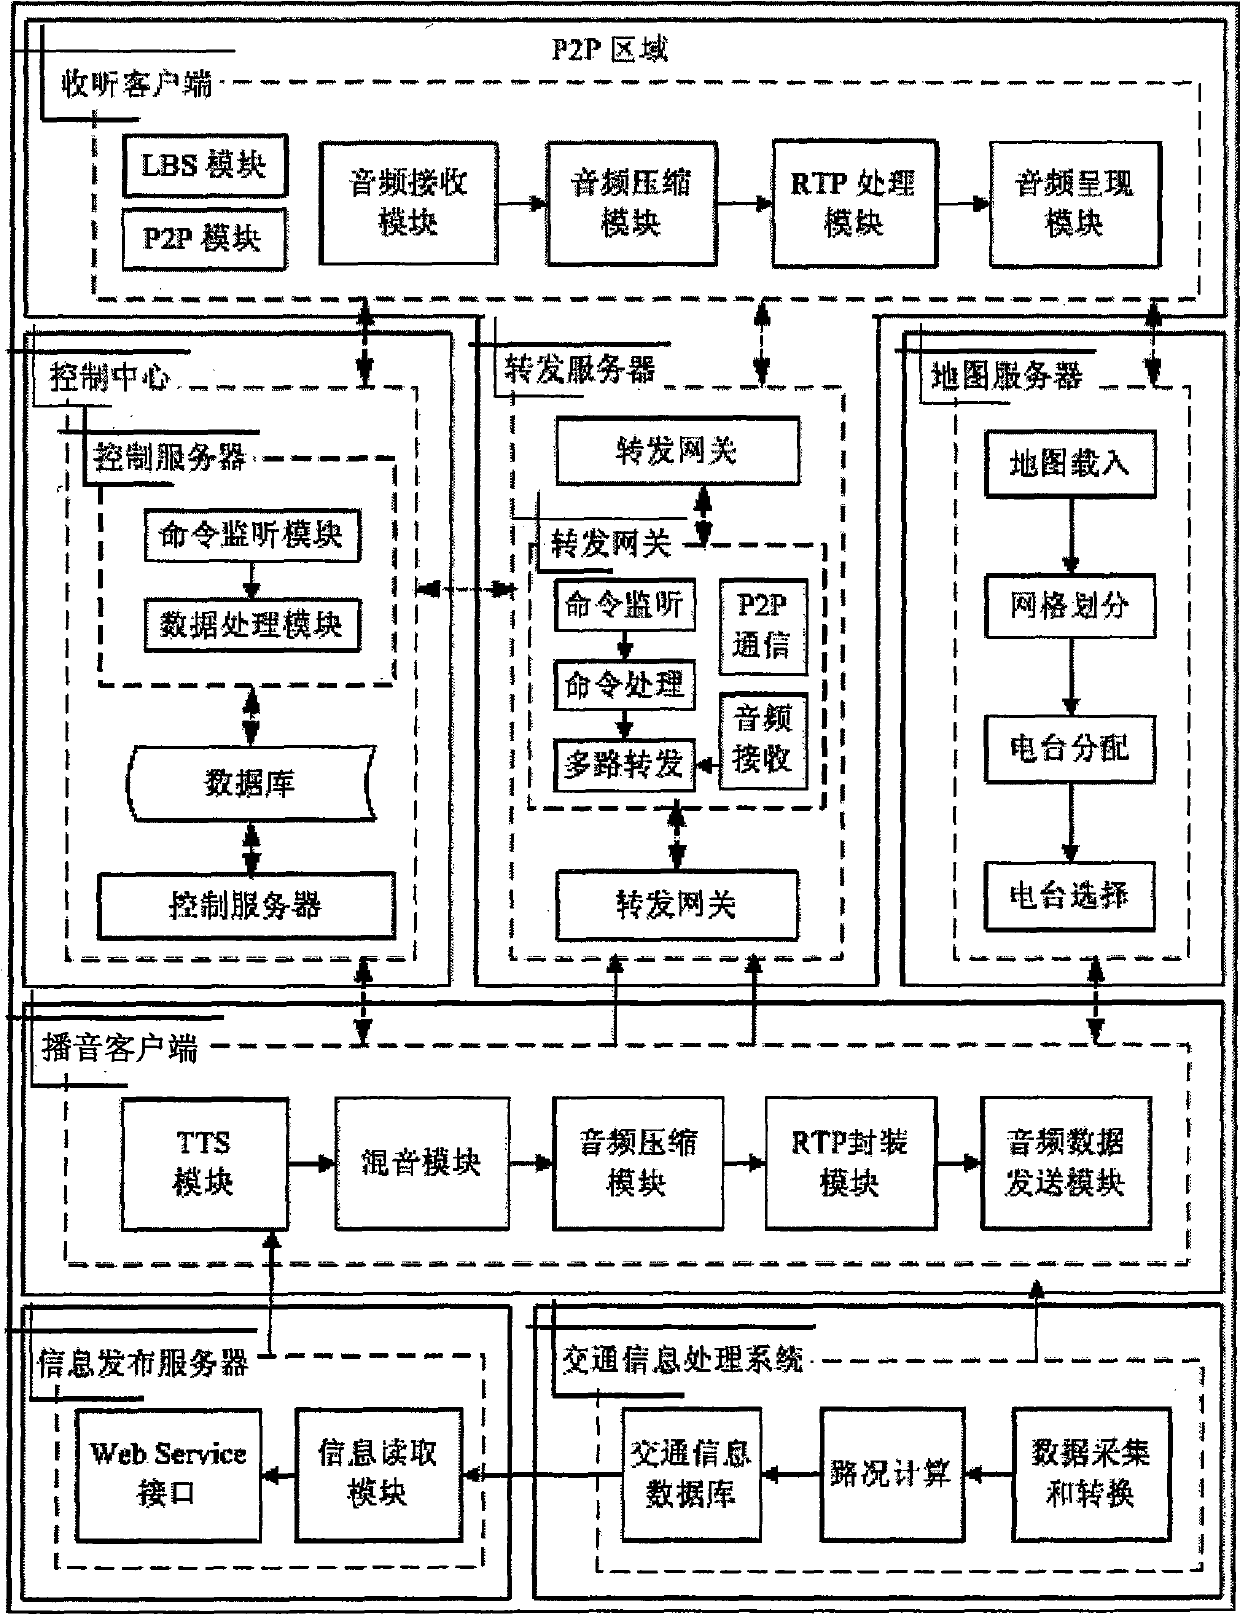 Network radio station system for real-time broadcasting traffic information based on user position